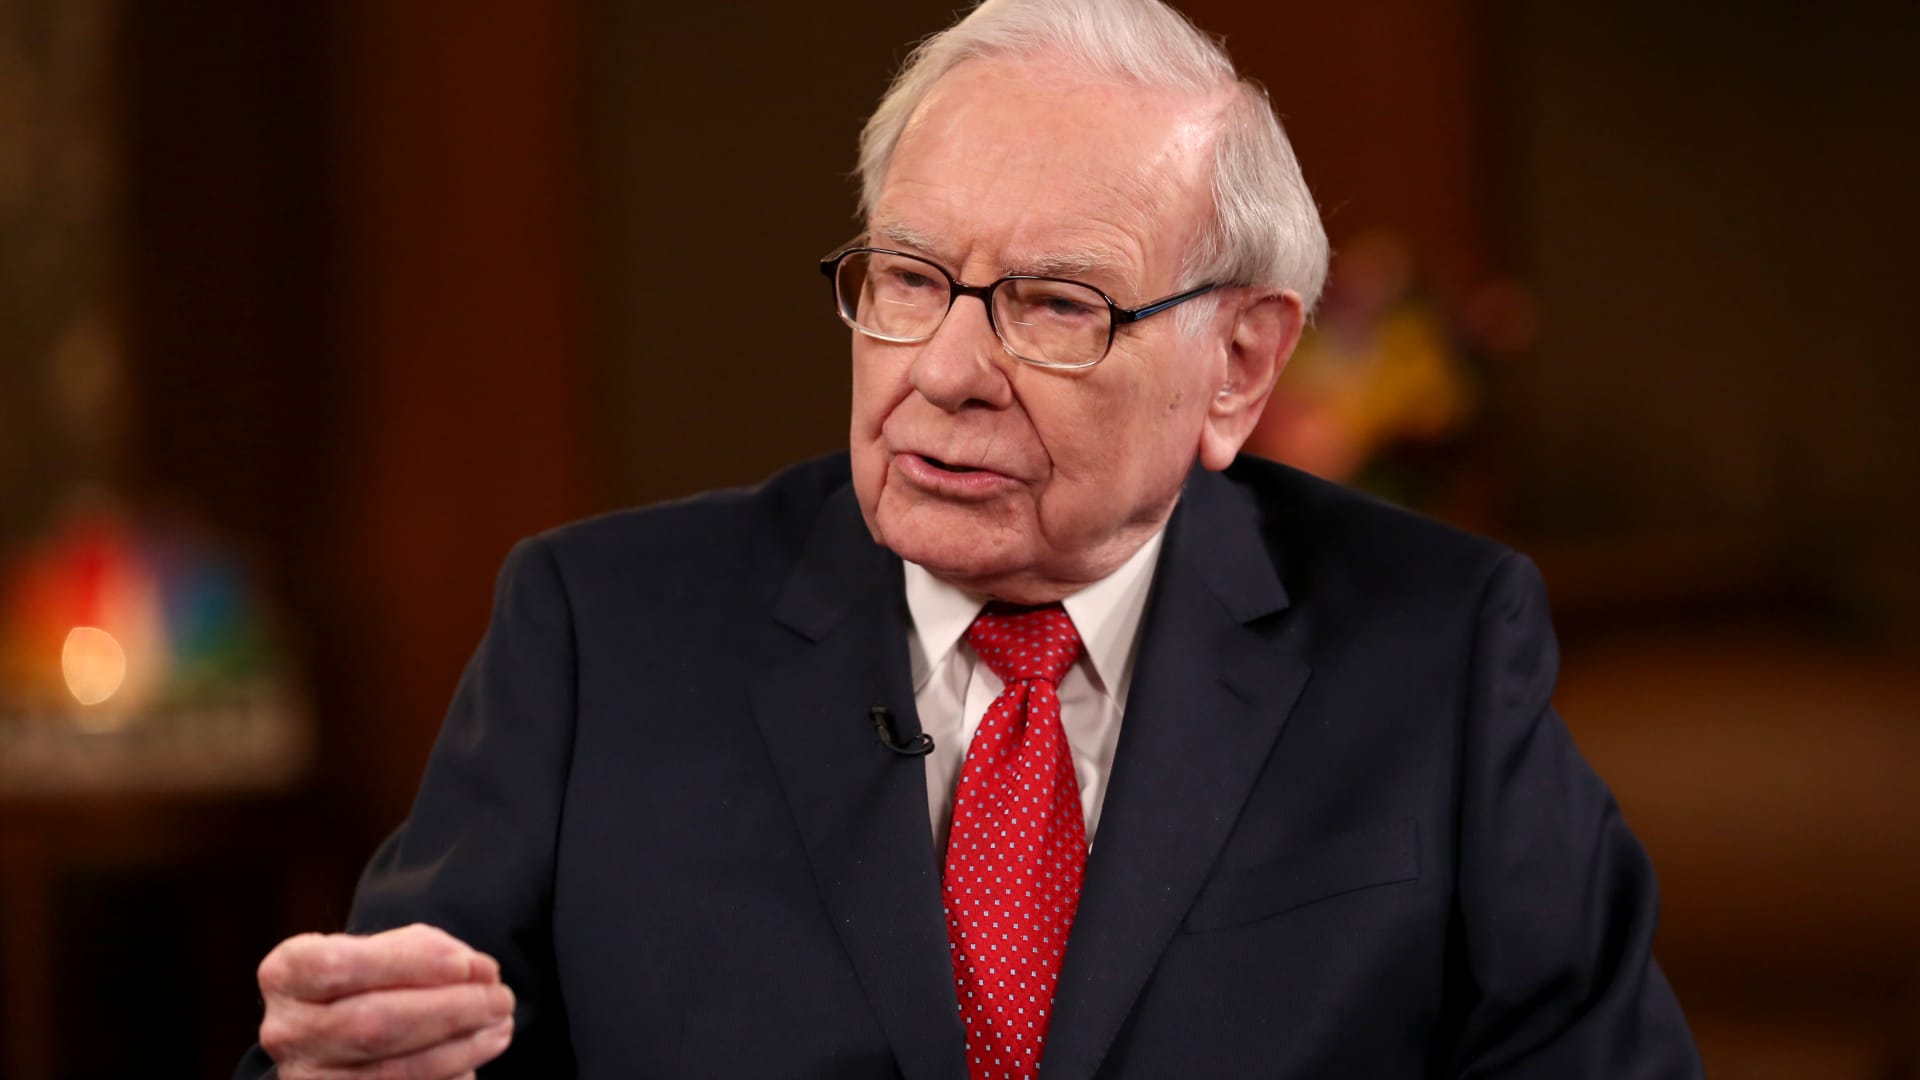 Berkshire earnings decline in the first quarter on slowing economic growth stock market pullback – CNBC